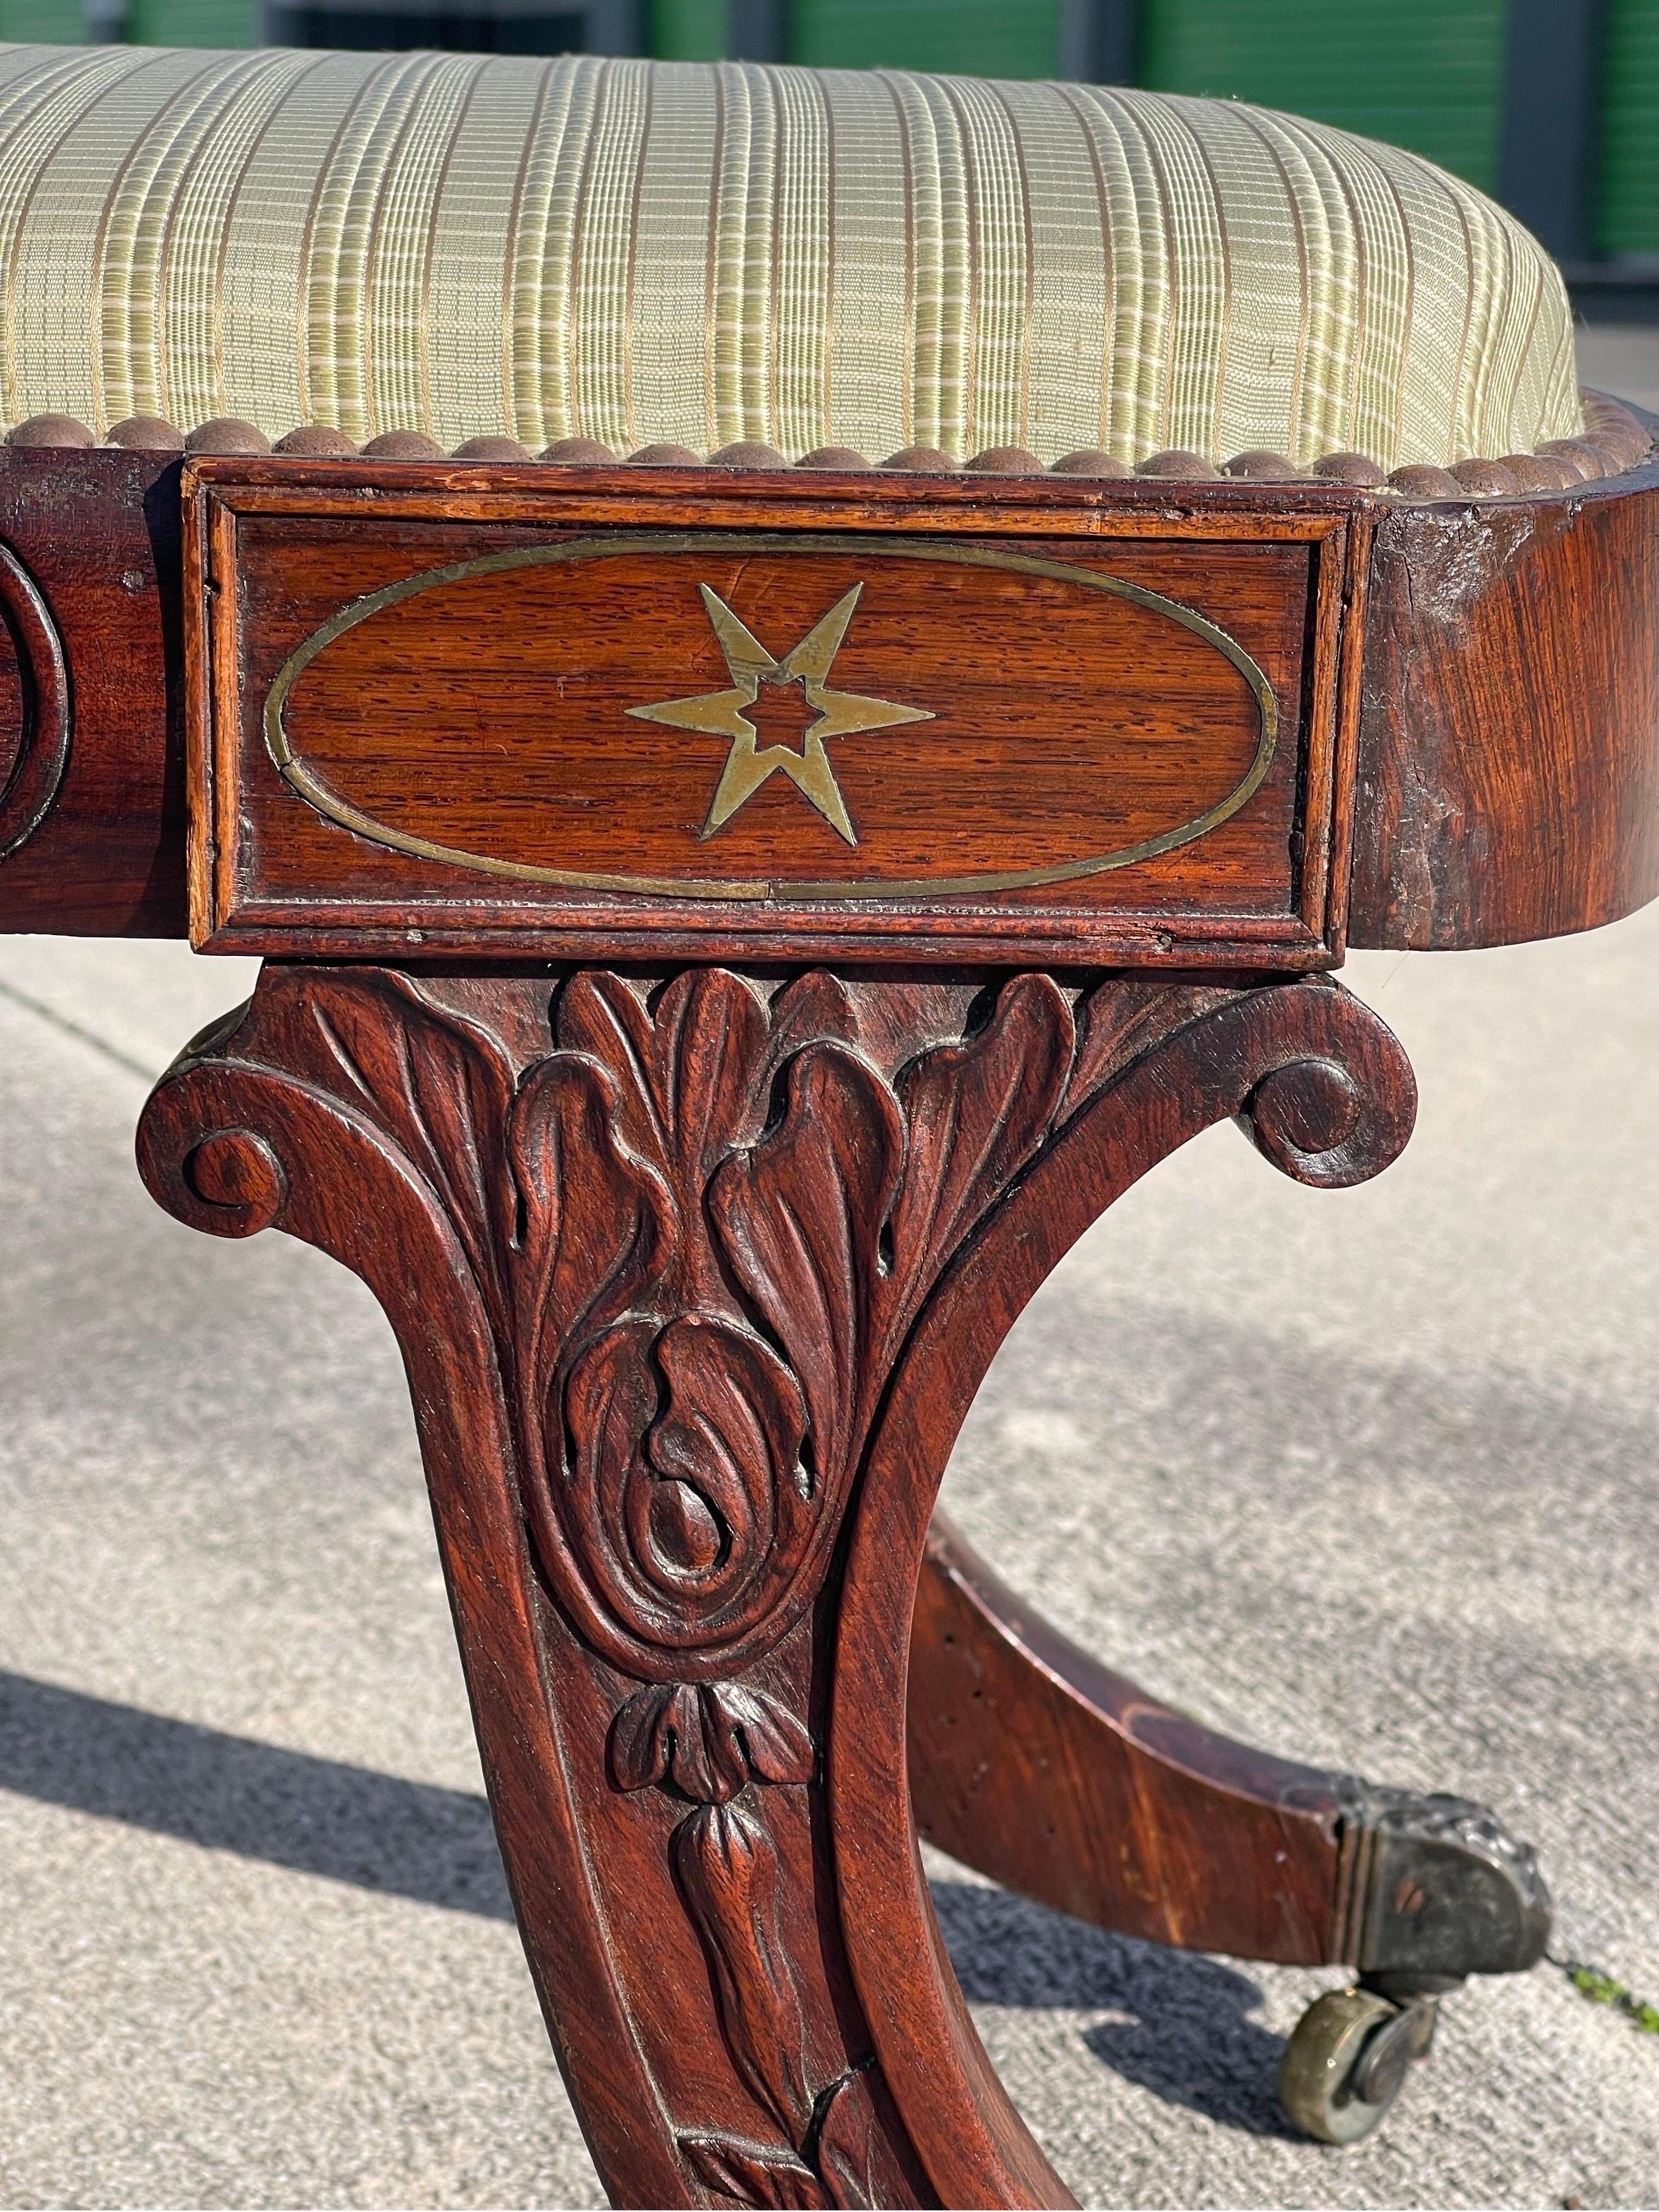 19th C. American Empire Carved Rosewood Bench on Casters, Duncan Phyfe Style In Good Condition For Sale In Jensen Beach, FL